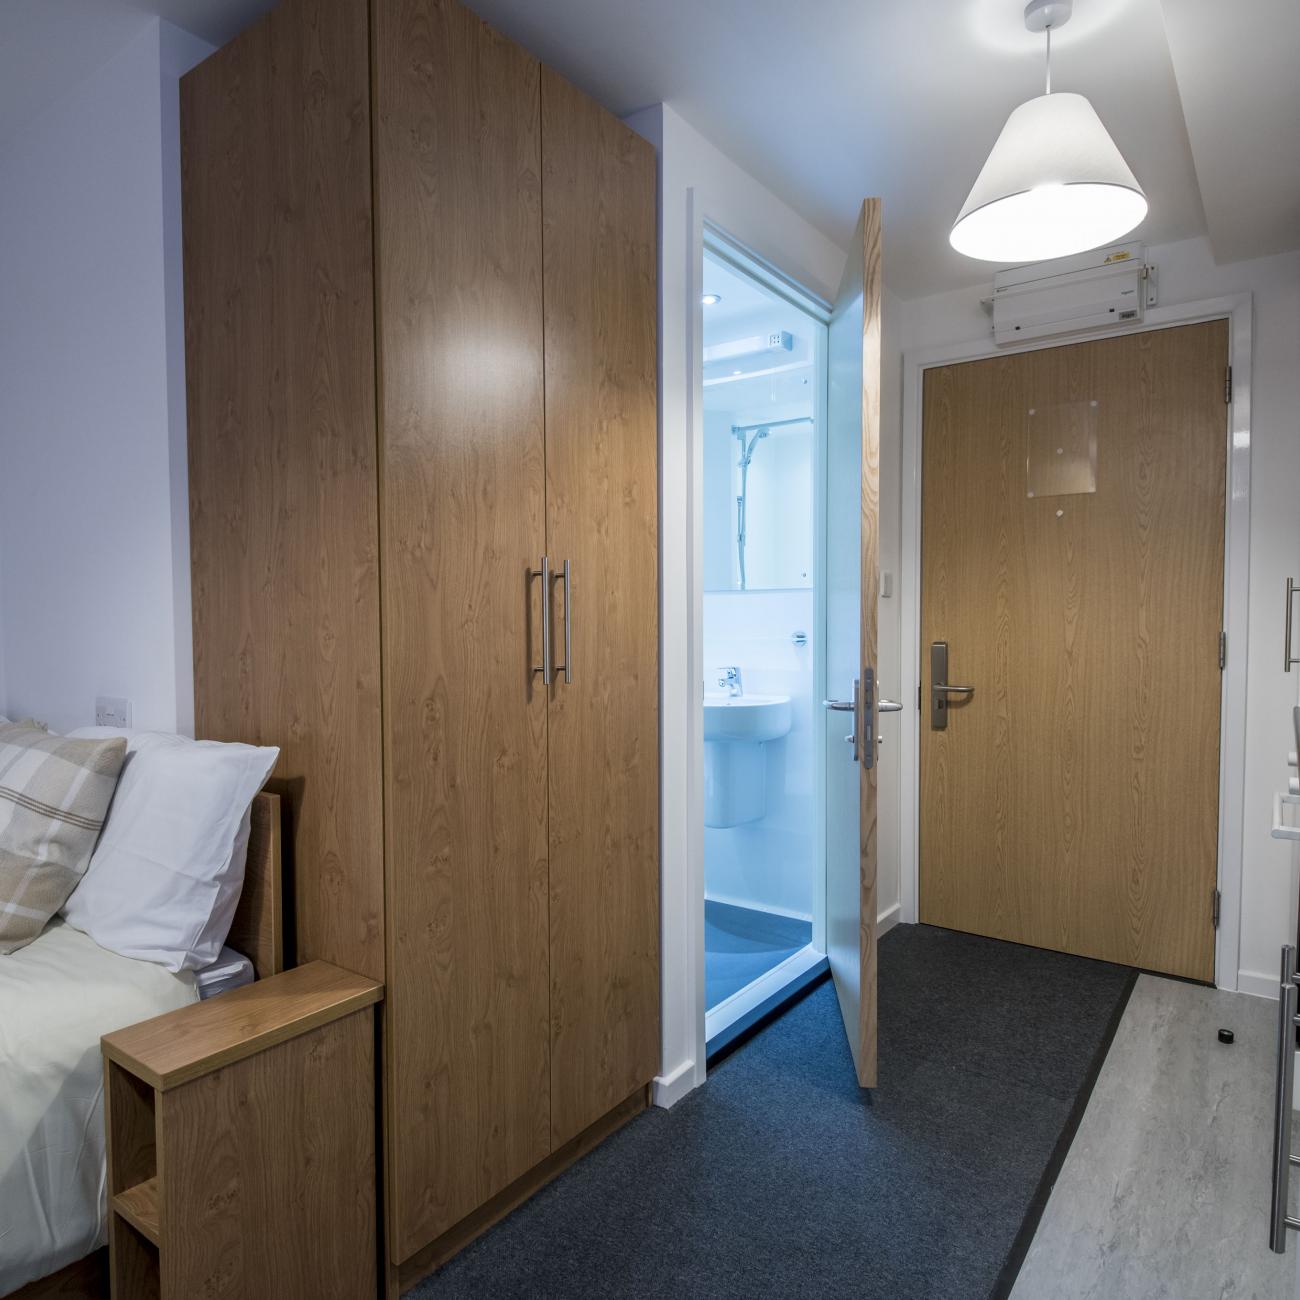 A modern studio flat showing bed, kitchenette and entrance to bathroom.